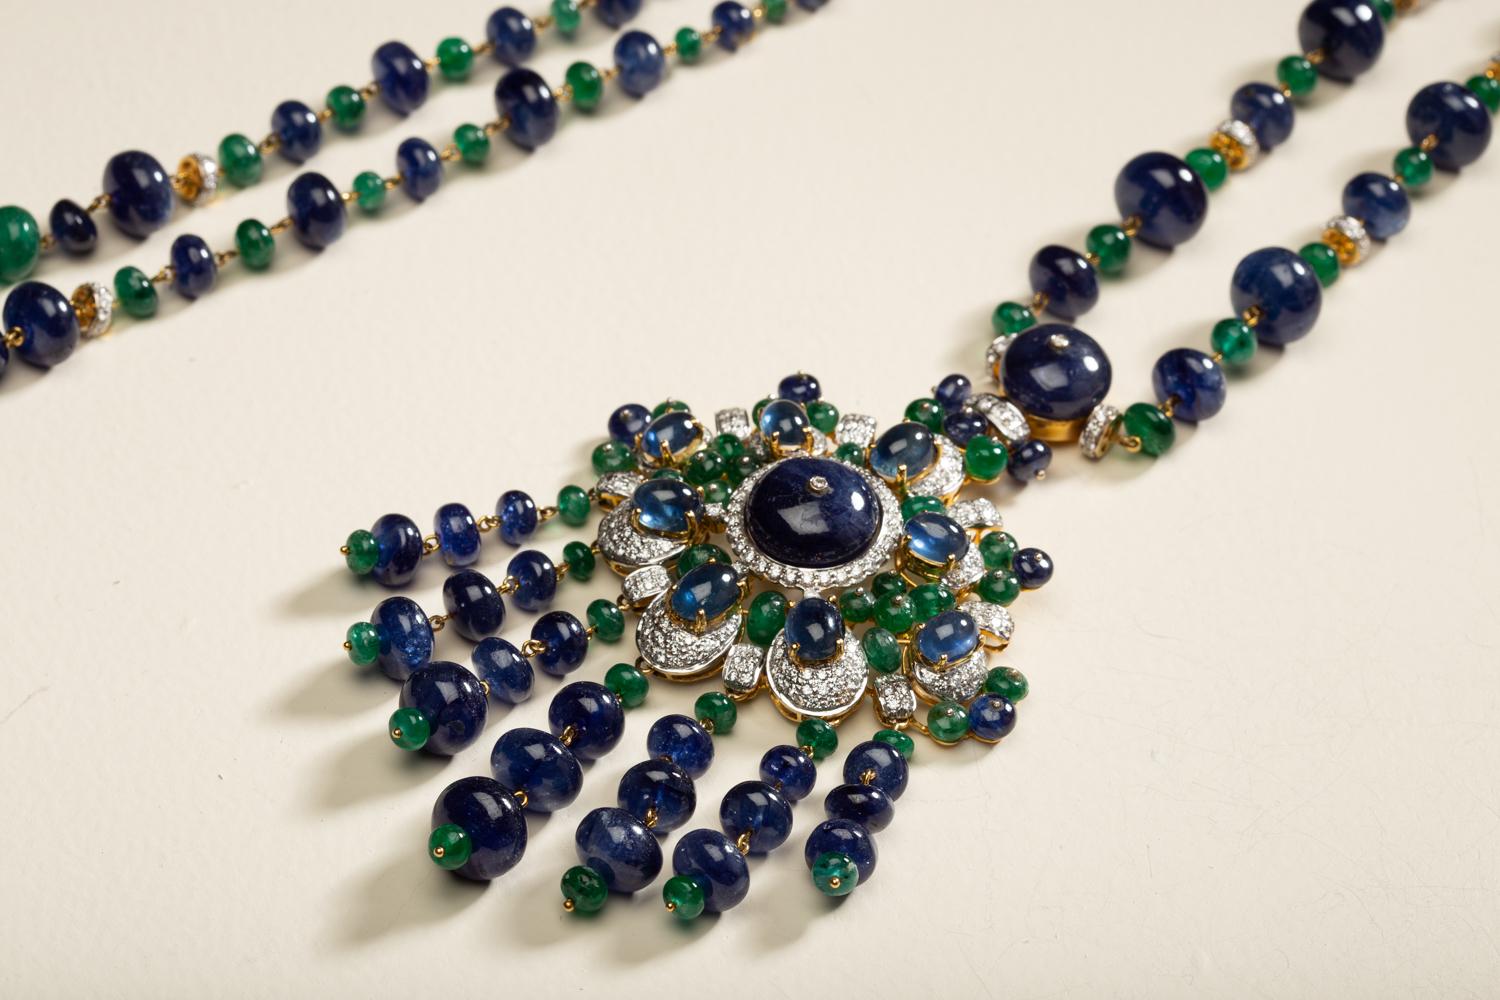 “The Peacock Necklace“ 

7.78 carats of diamonds, 97.61 carats of Emeralds, and 548.89 carats of Blue Sapphires set in 18kt Gold. 

*Free Shipping Worldwide